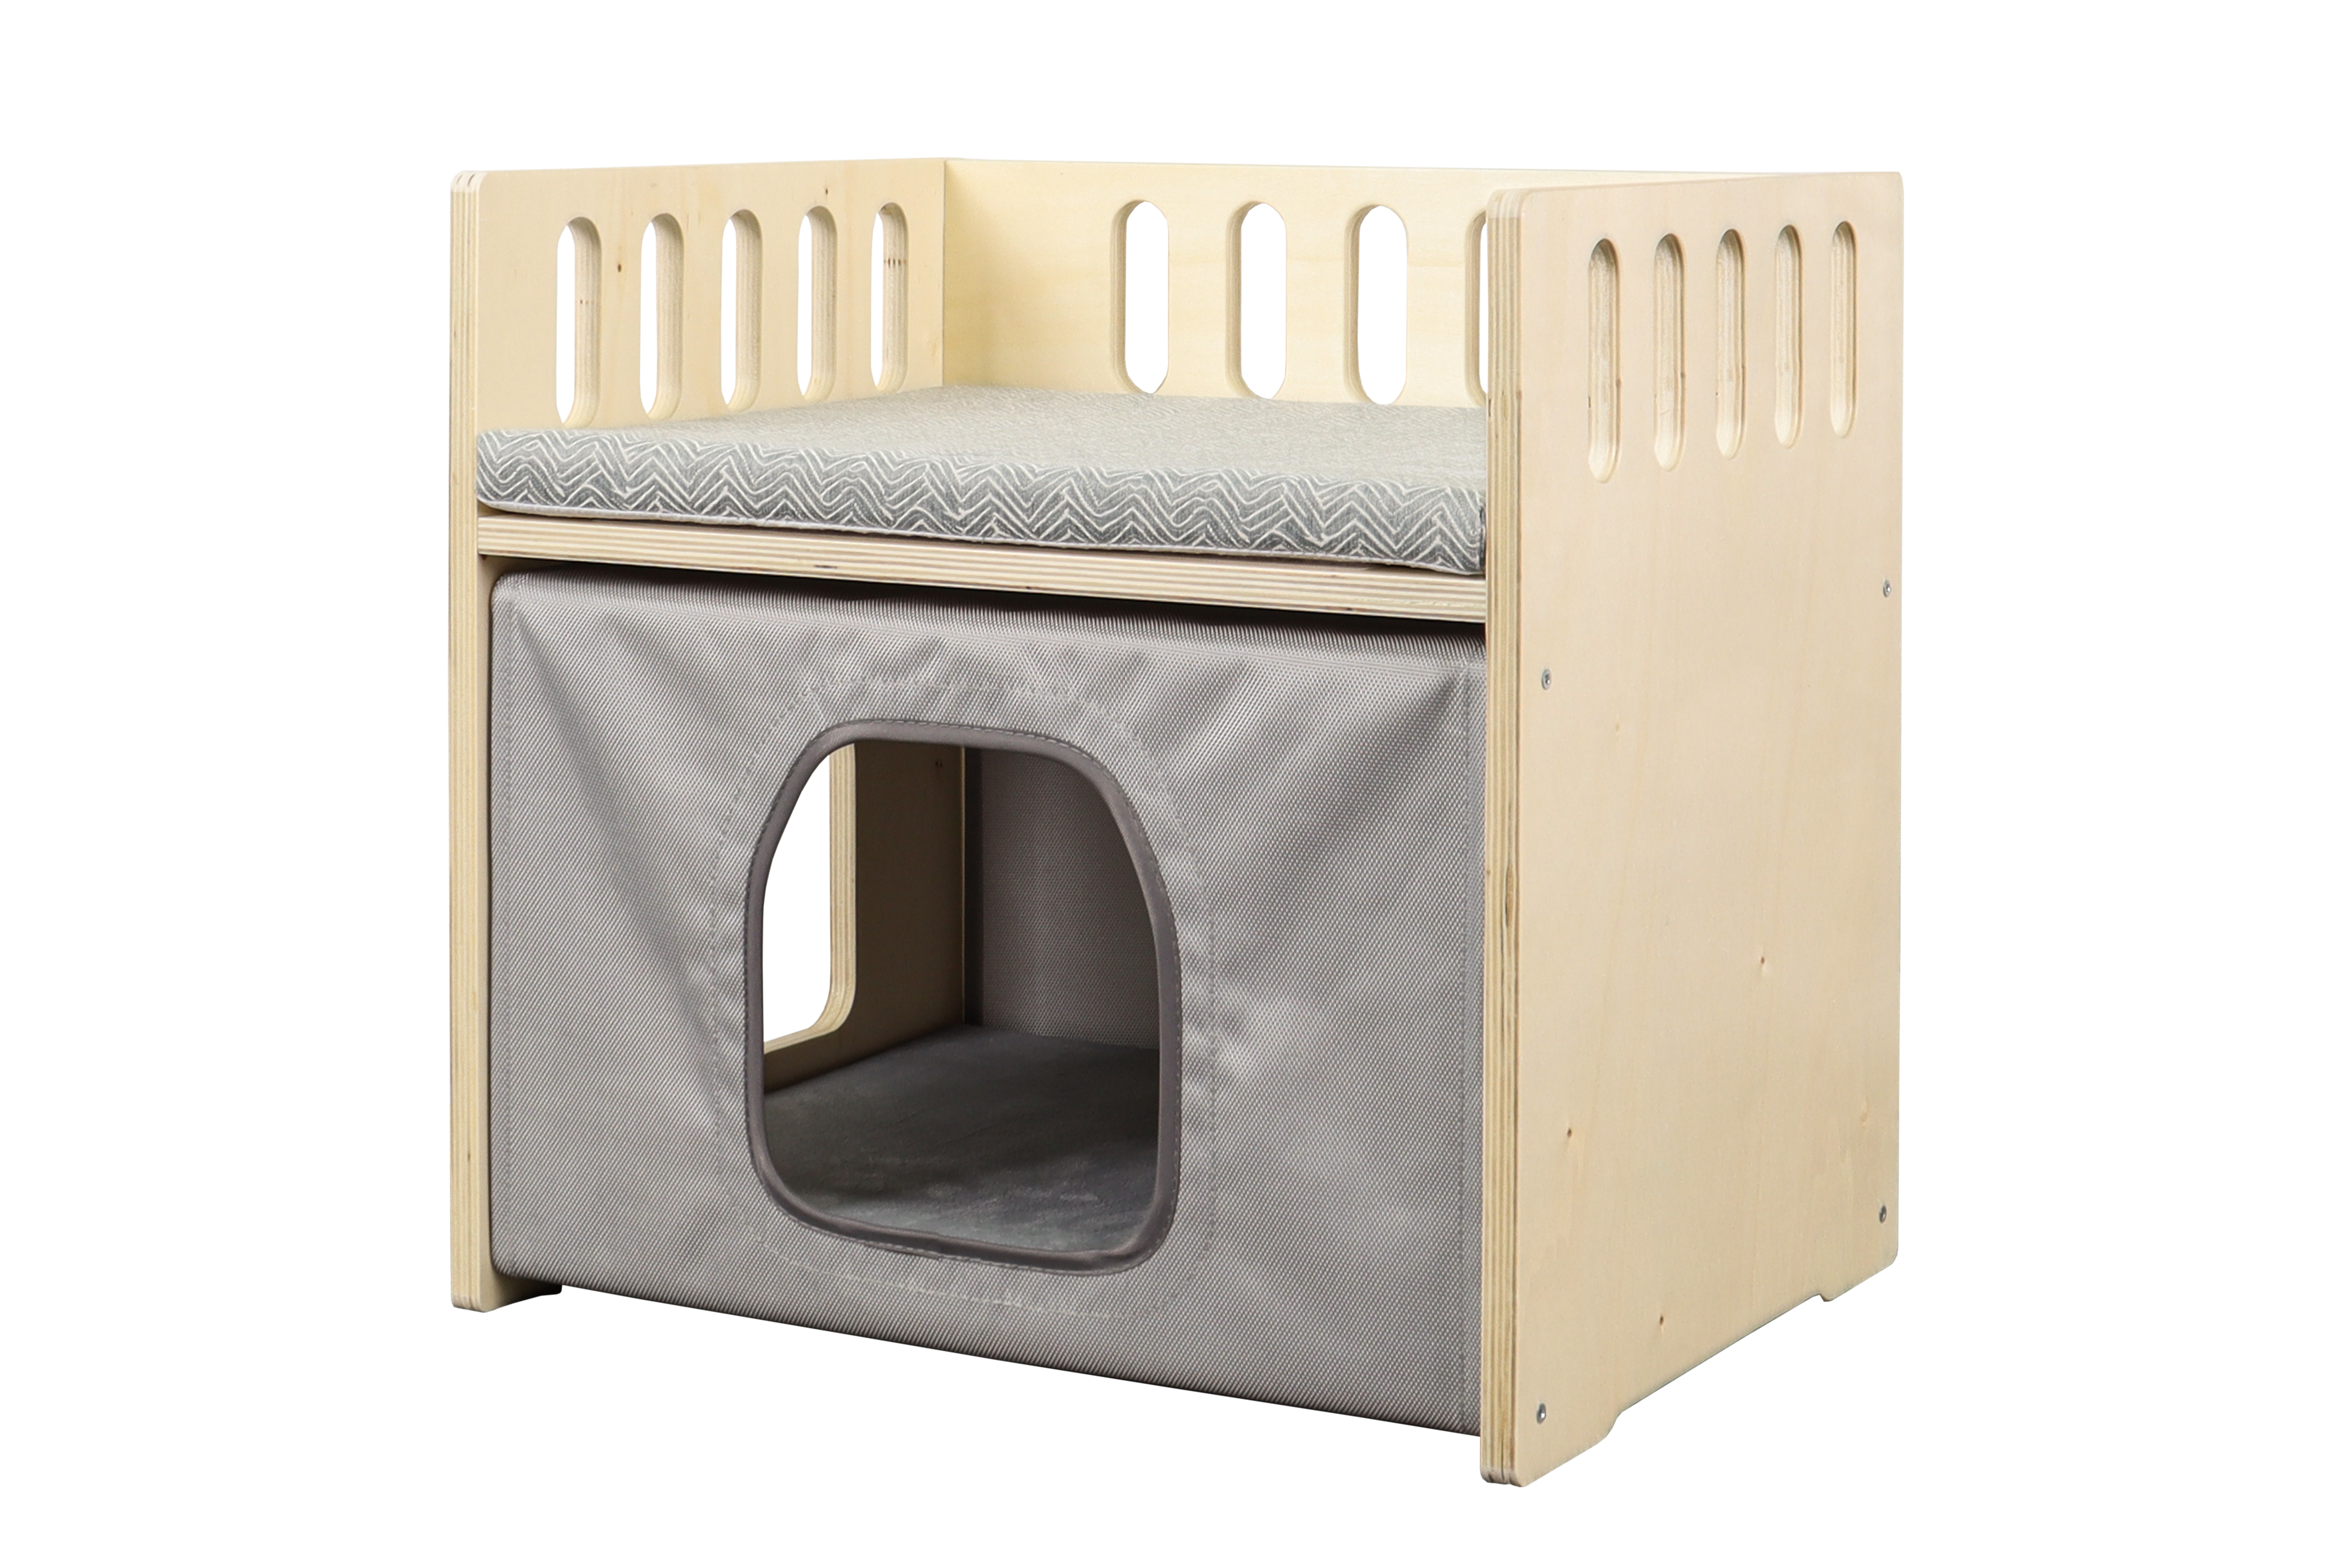 CB-PBM121139 Dual Hole Warm Cat House, Cat Shelter With Removable Soft Mat, Cushion And Fence On The Roof, Easy To Assemble